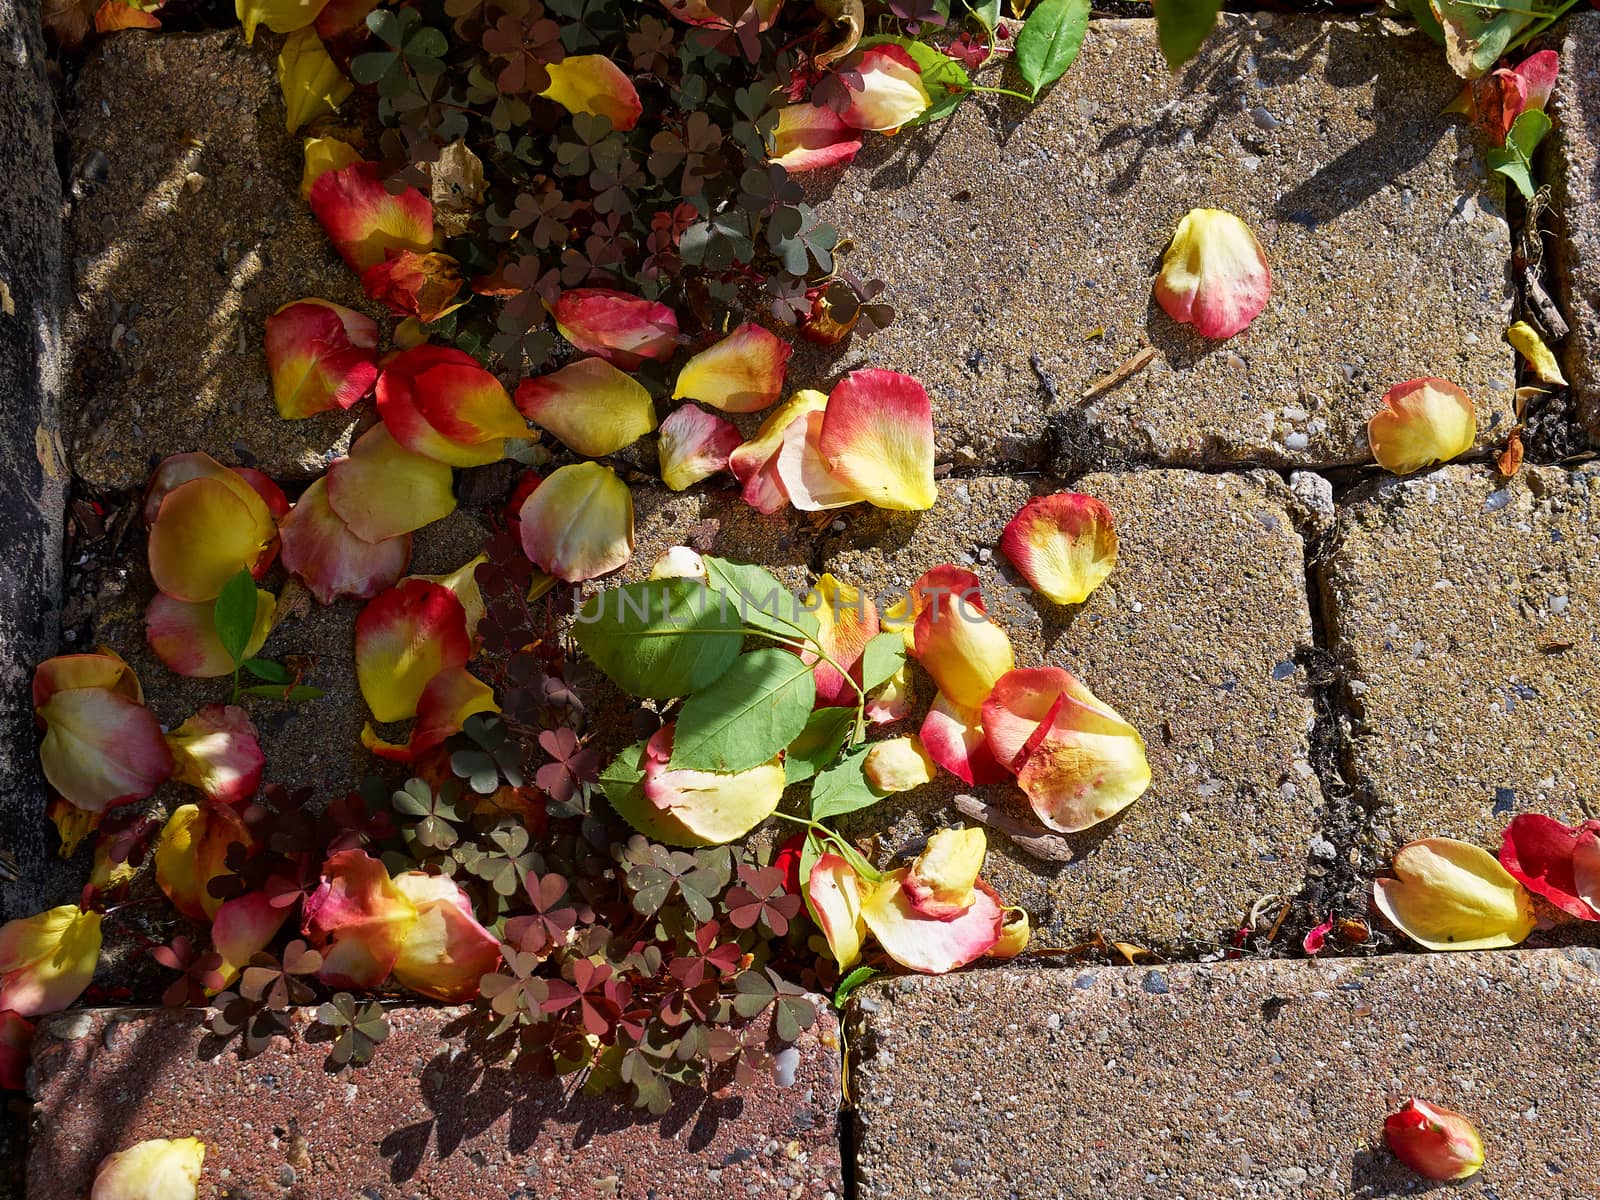 Rose petal leaves on the ground by Ronyzmbow